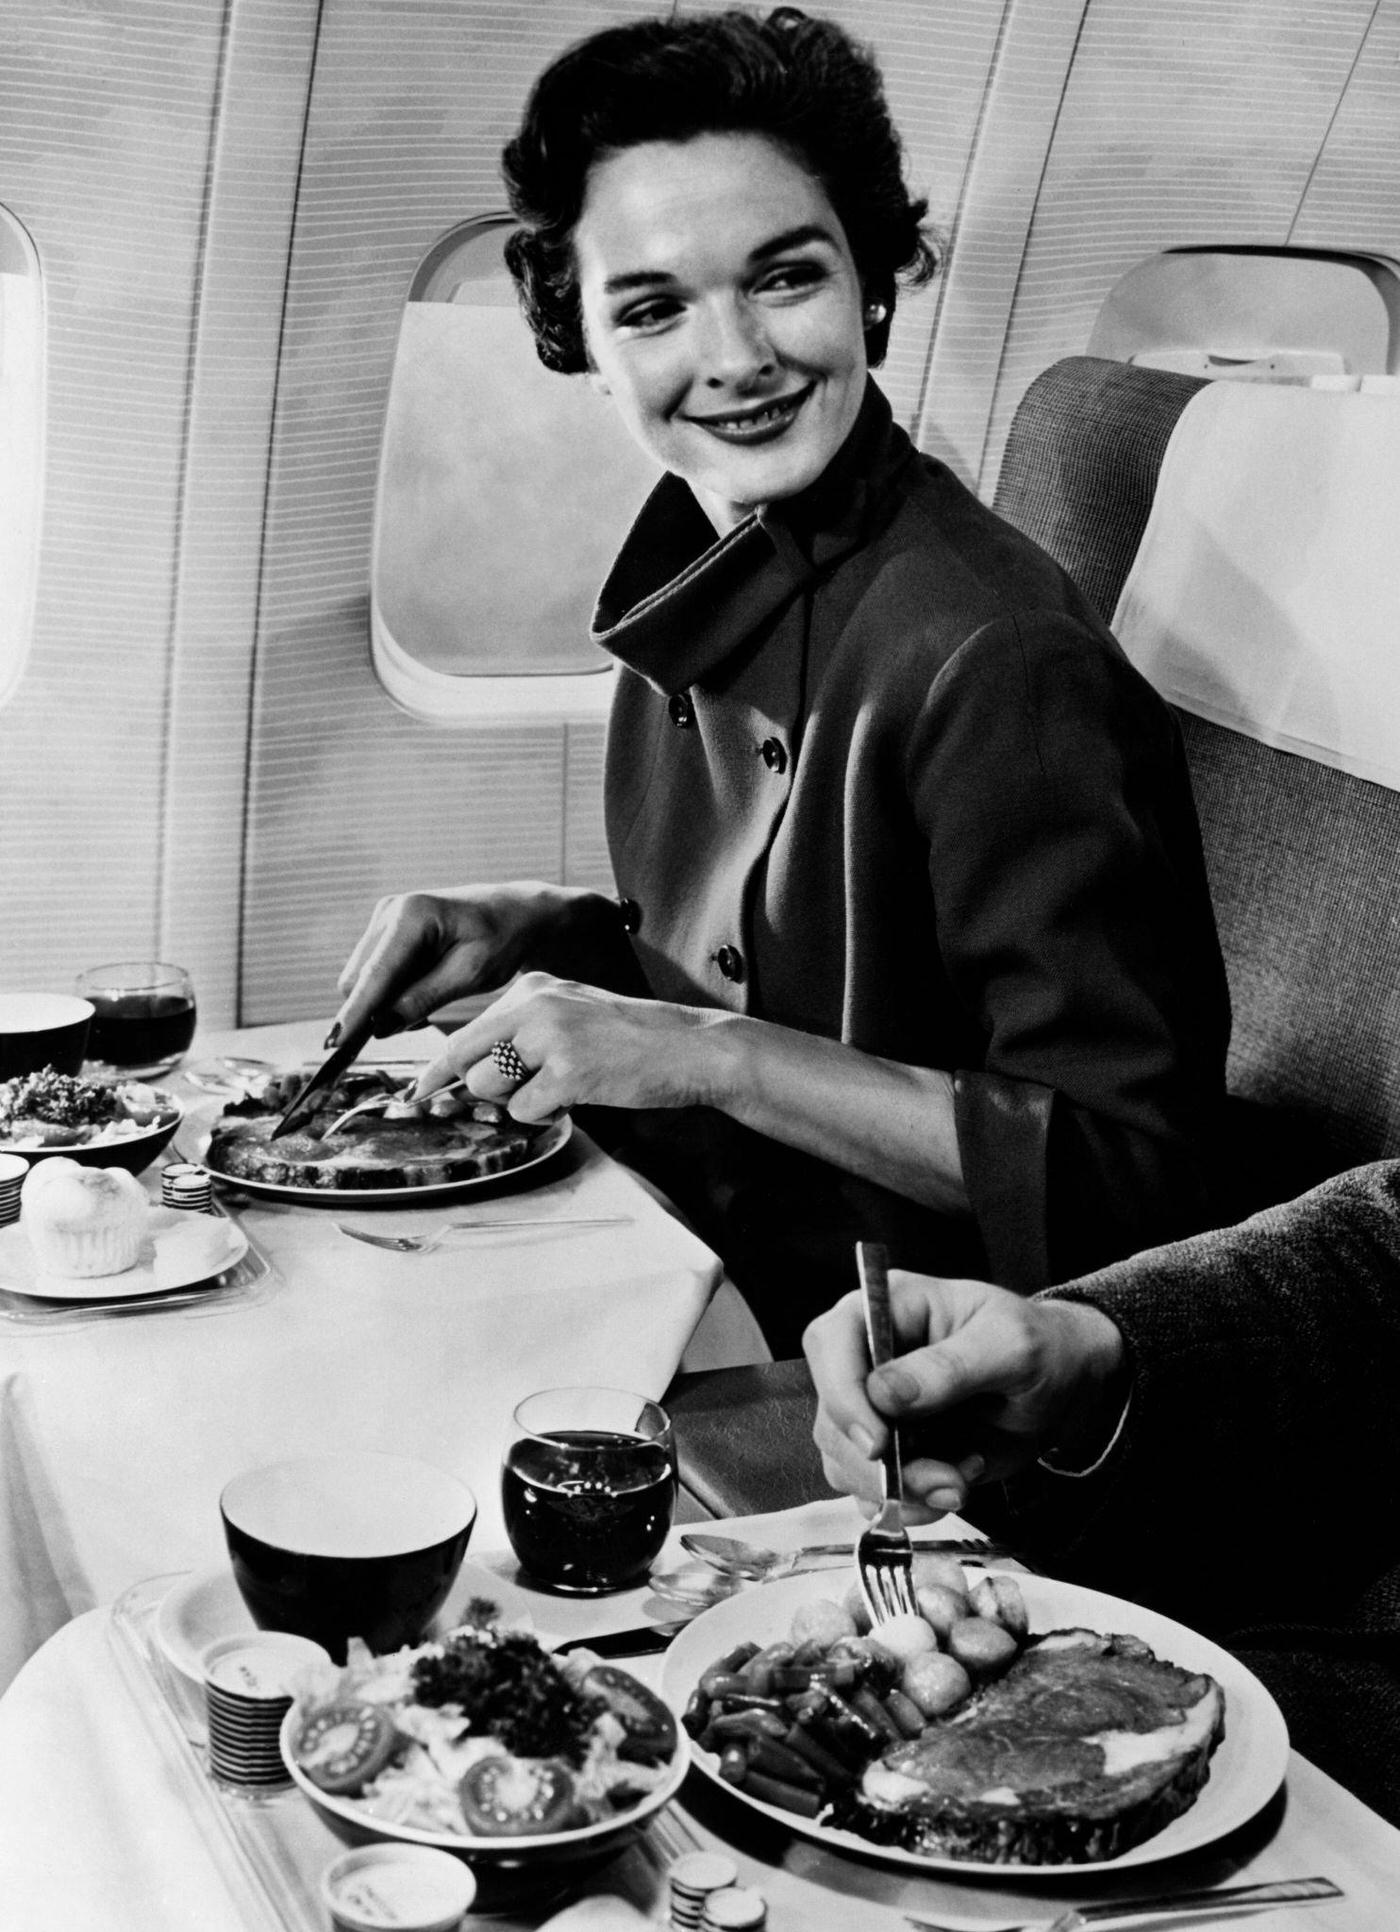 A woman on a plane in 1960.